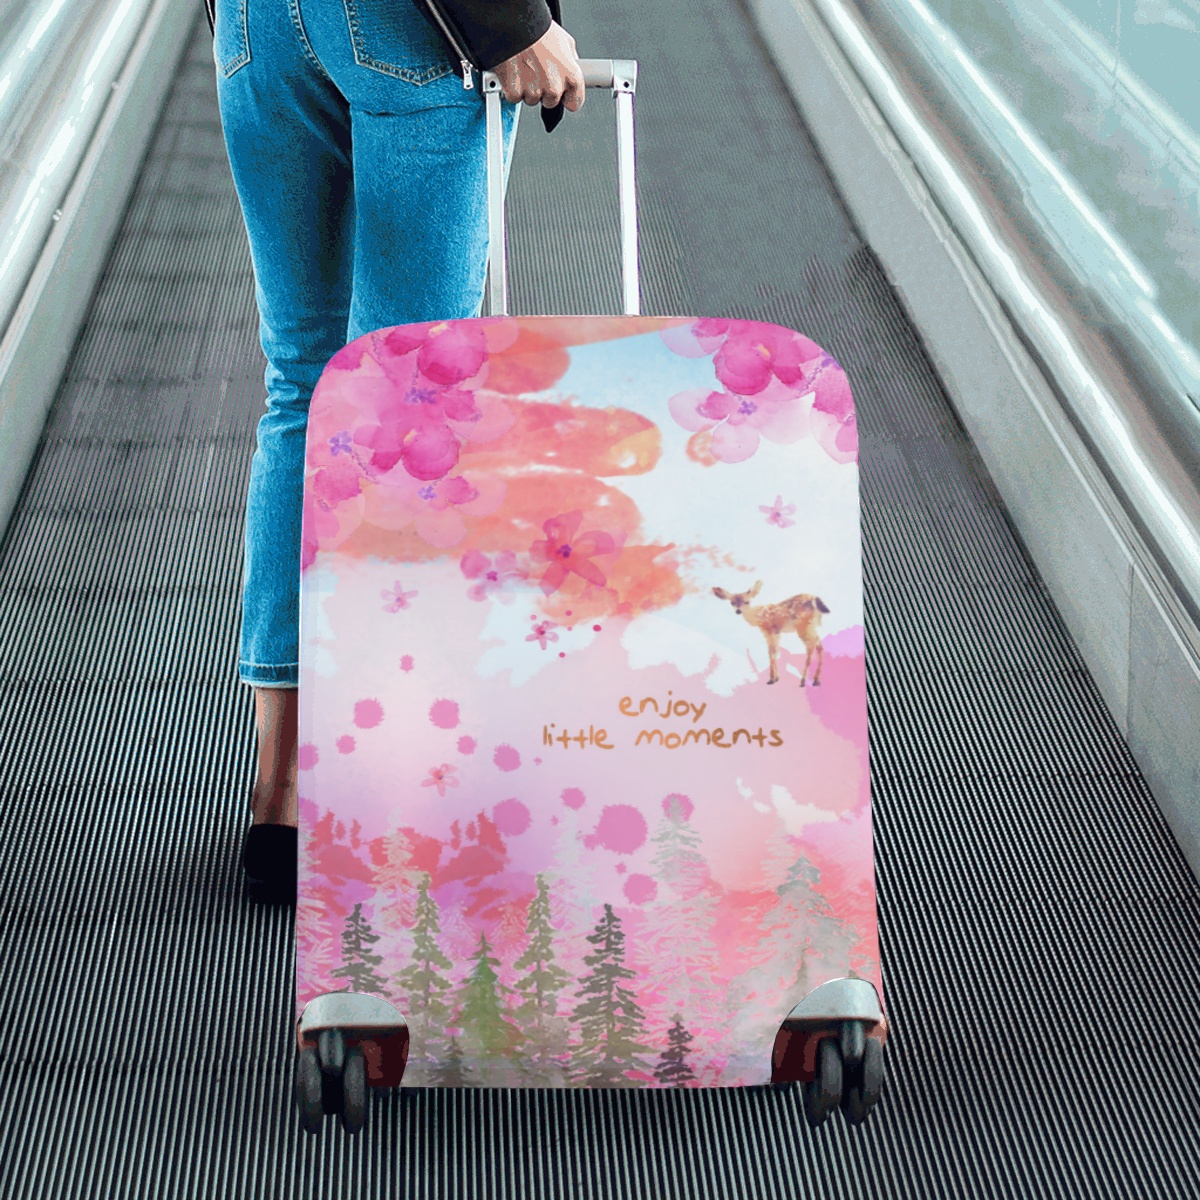 Little Deer in the Magic Pink Forest Luggage Cover/Large 26"-28"